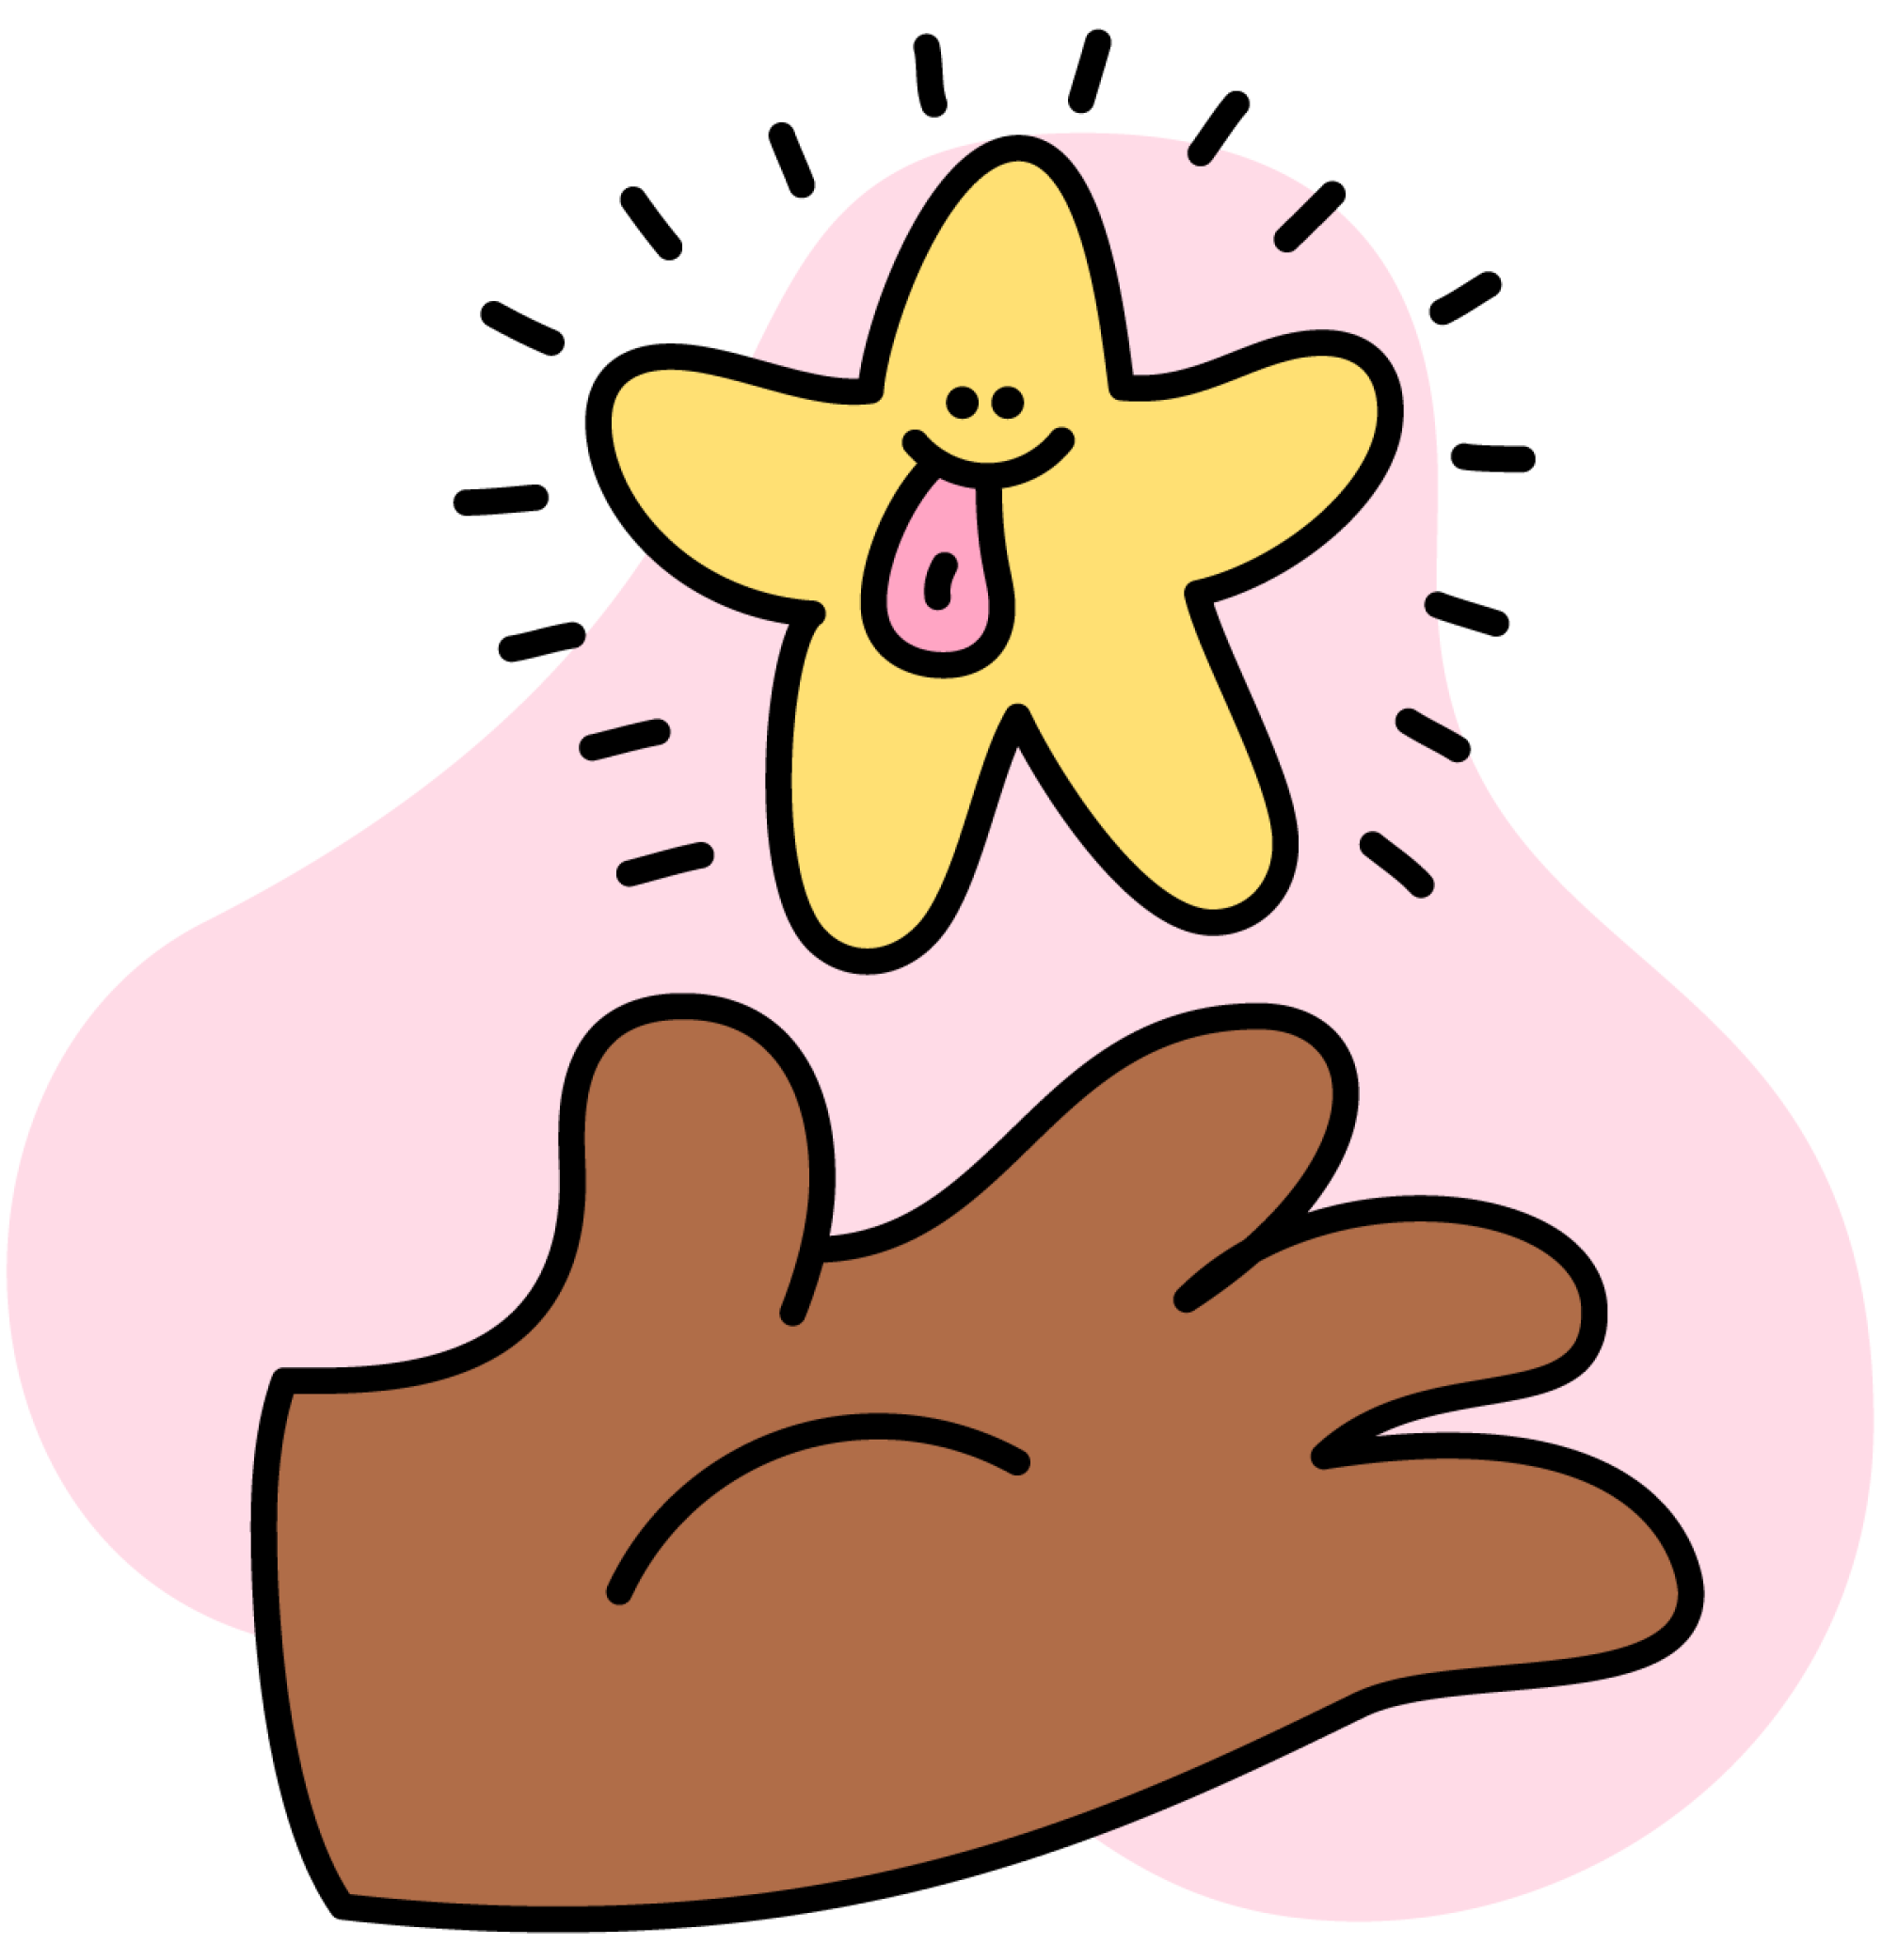 Illustration of a hand palm up with a star above it